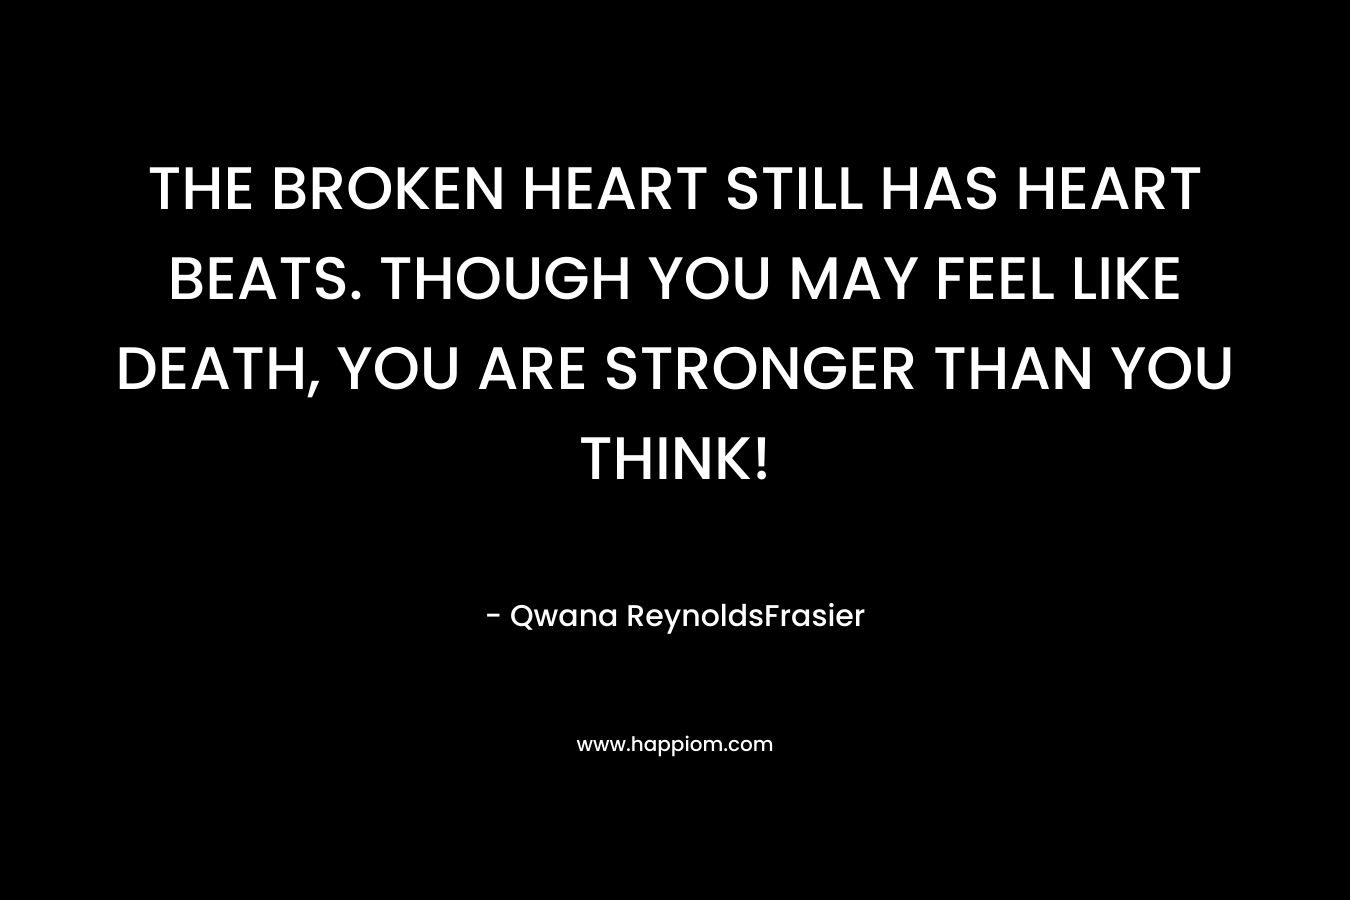 THE BROKEN HEART STILL HAS HEART BEATS. THOUGH YOU MAY FEEL LIKE DEATH, YOU ARE STRONGER THAN YOU THINK! – Qwana ReynoldsFrasier